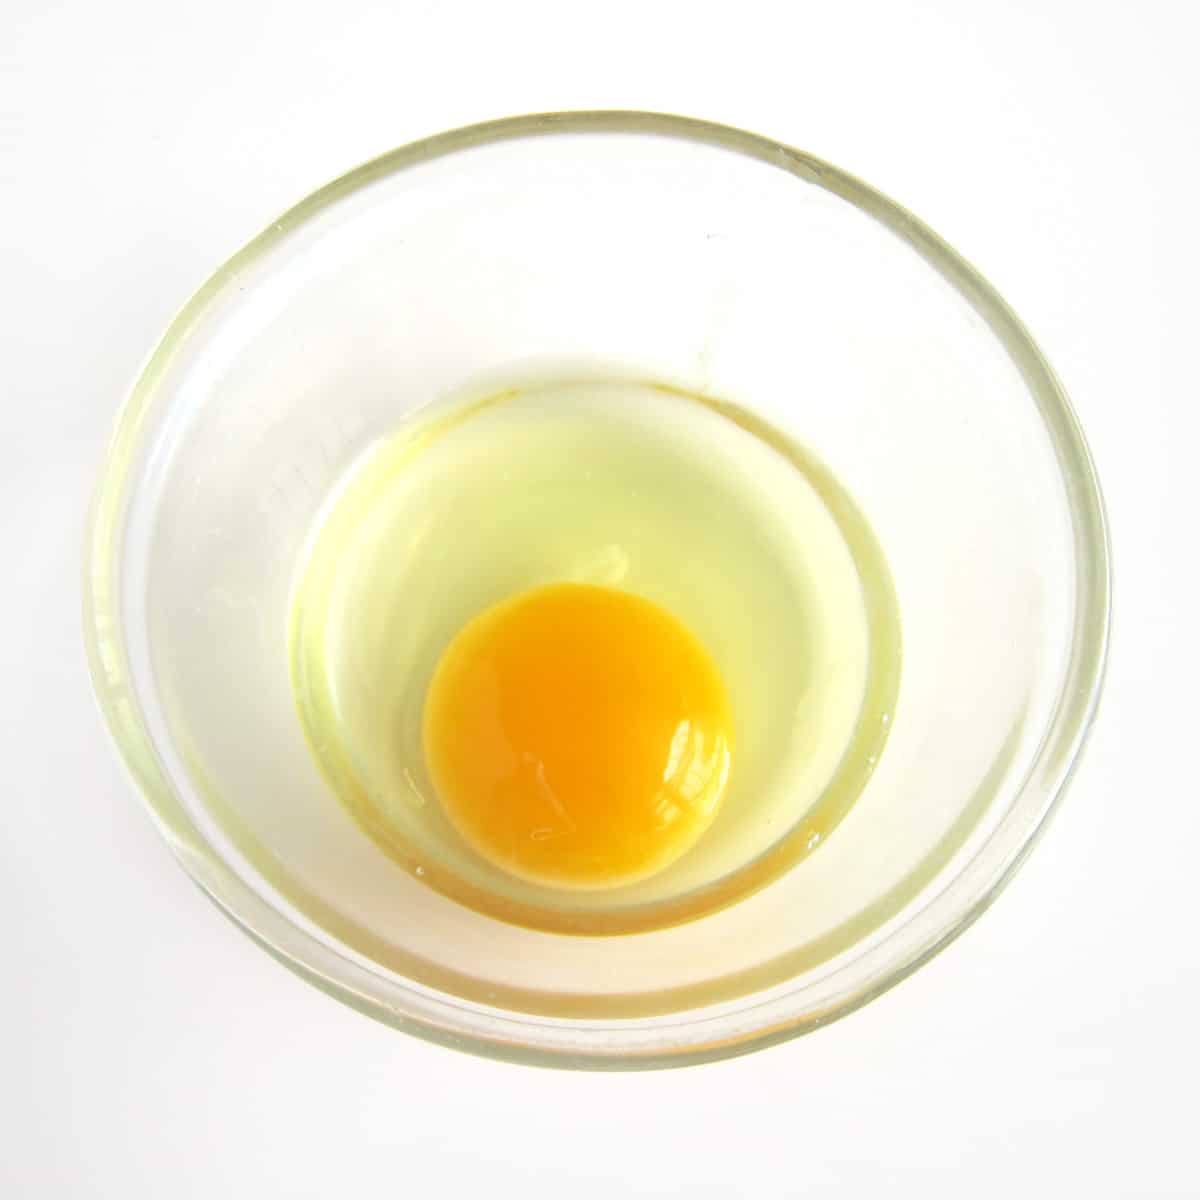 Egg in a small bowl.